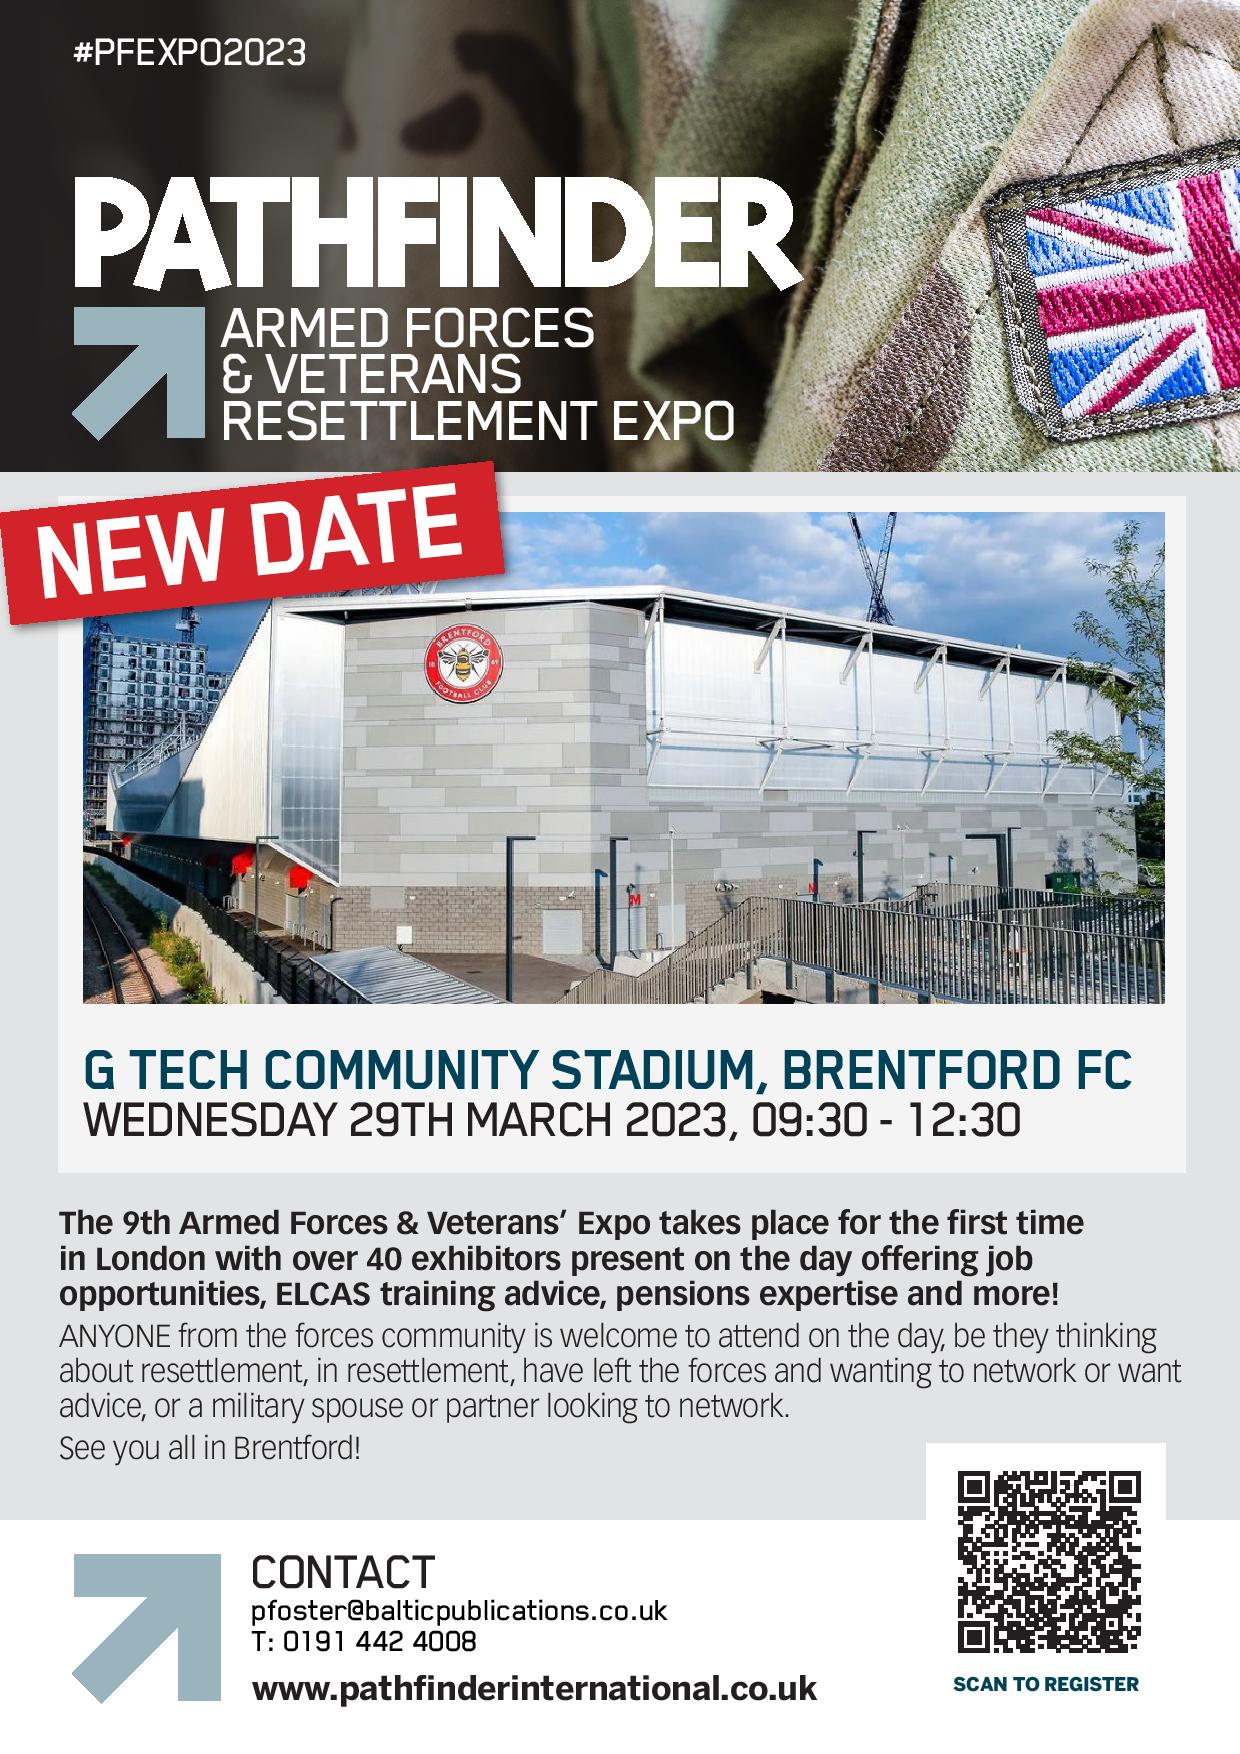 Armed Forces Expo London – Date Moved Due To National Rail Strikes